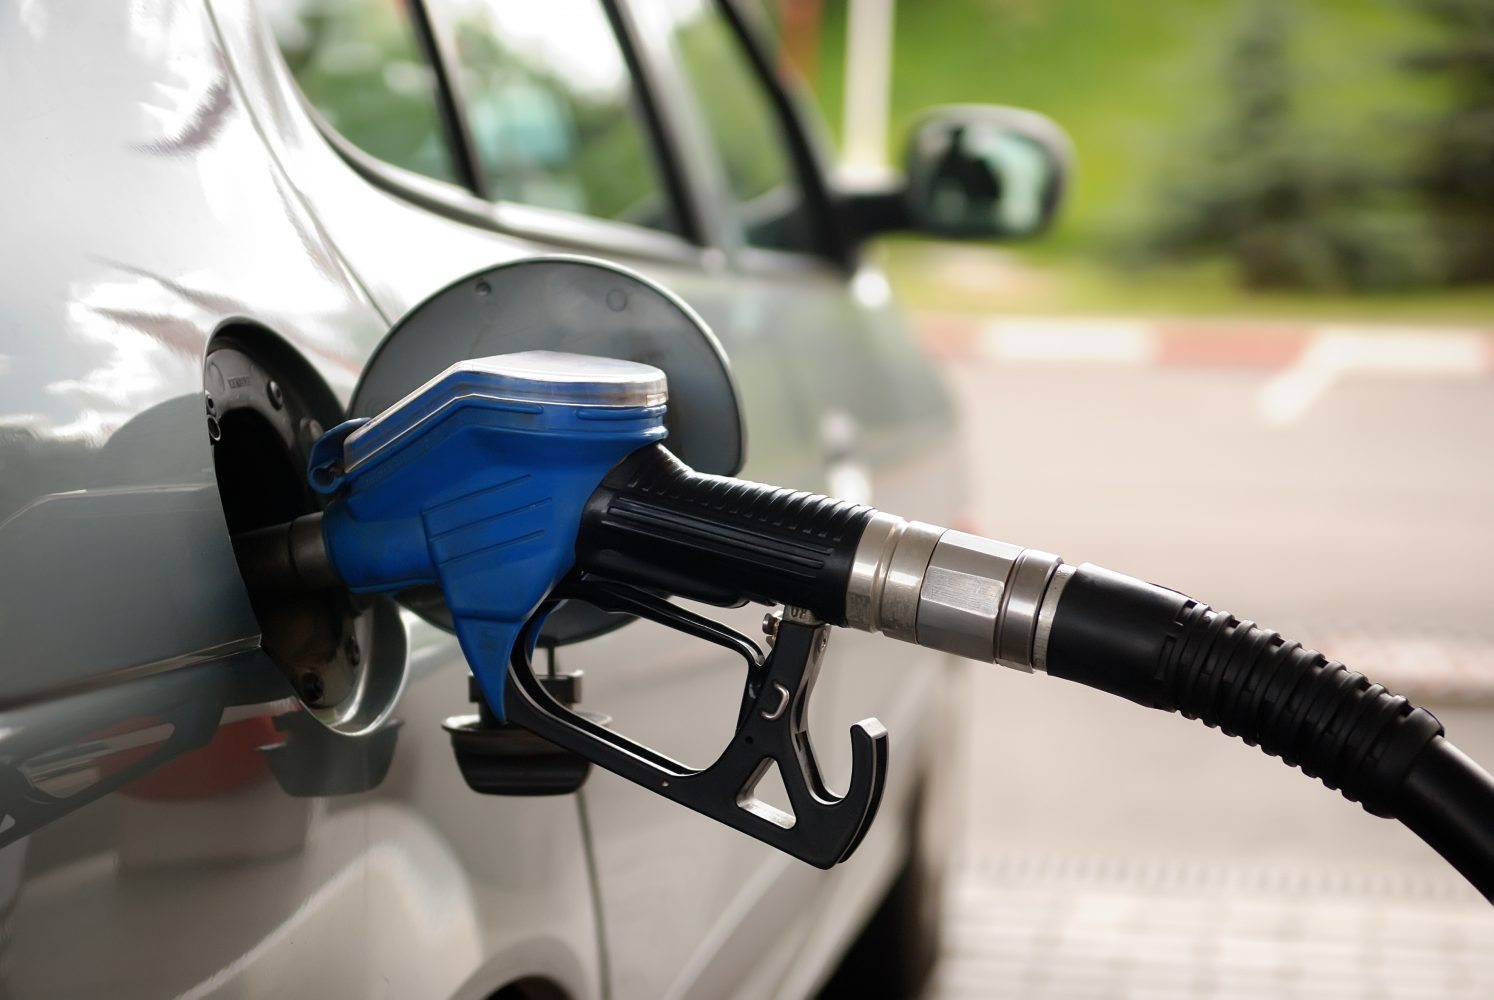 Motorists to Switch from Petrol & DieselMotorists to Switch from Petrol & Diesel